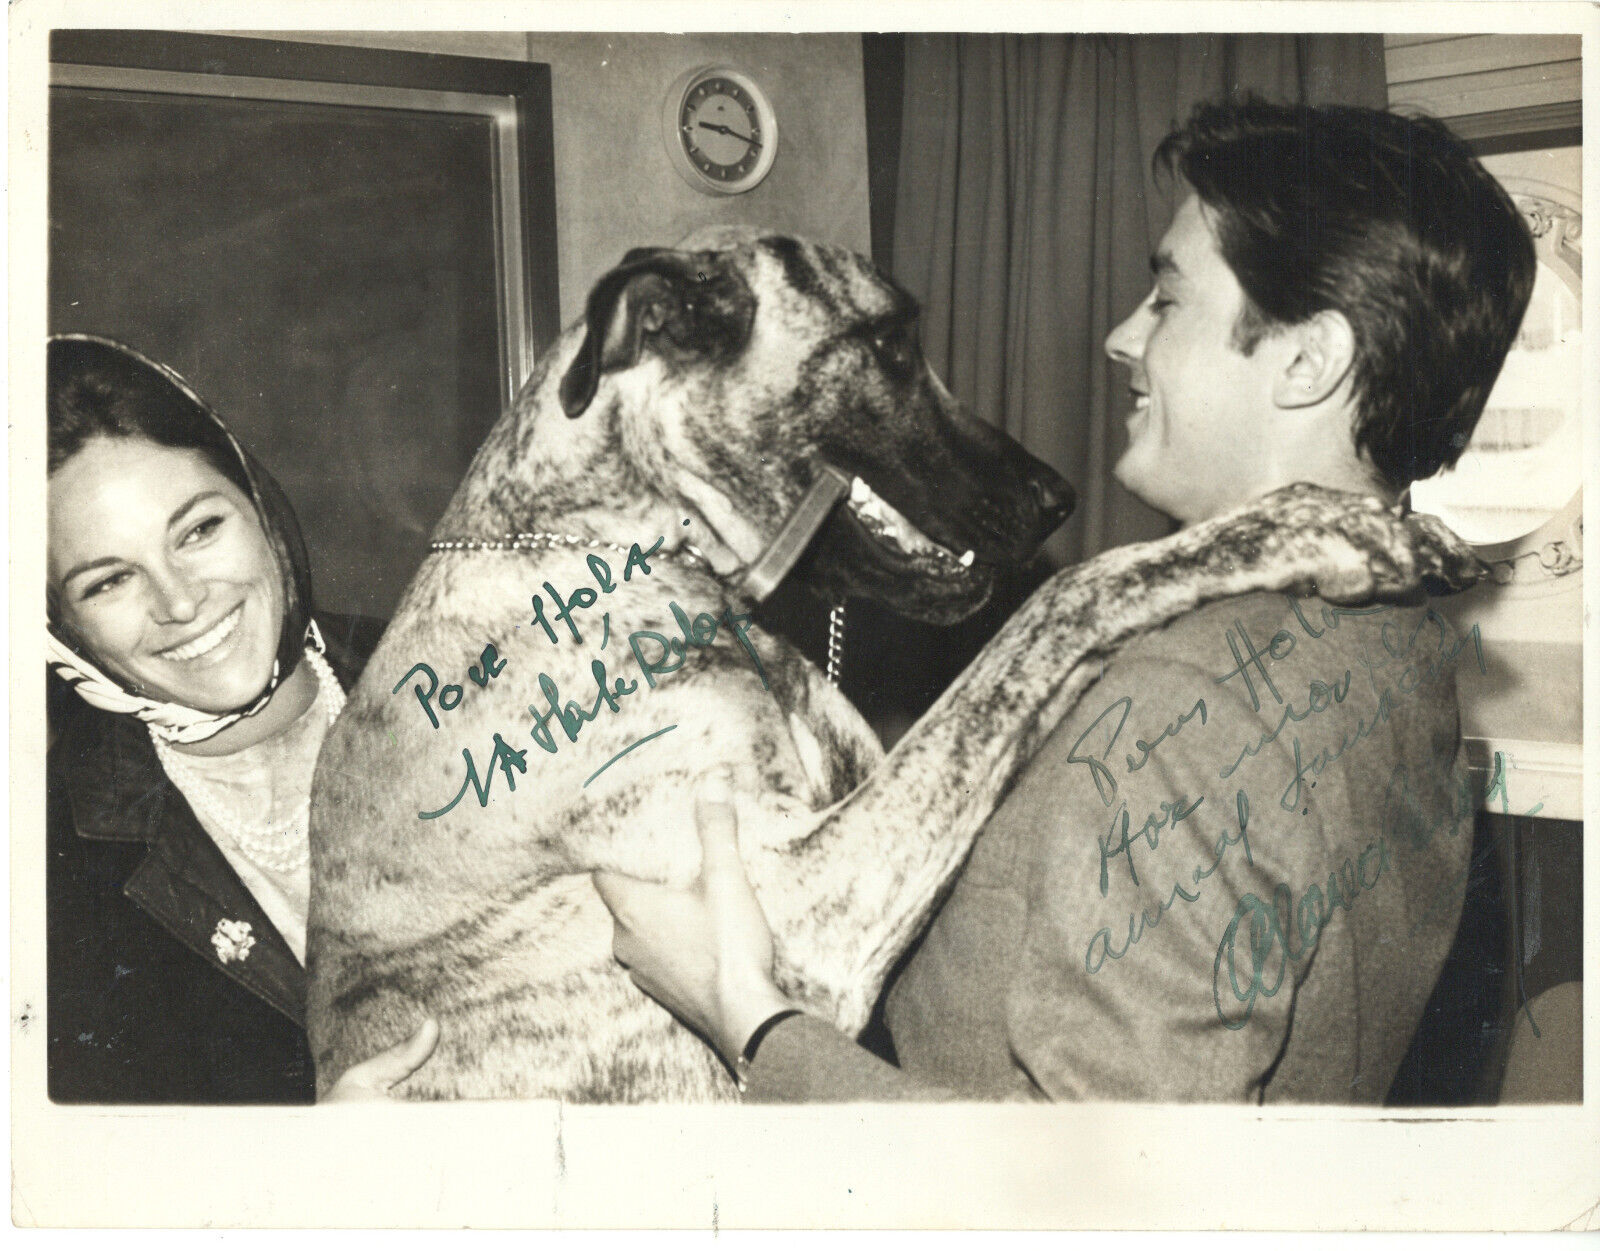 FRENCH ACTORS ALAIN DELON & HIS WIFE NATHALIE DELON, SIGNED VINTAGE CANDID PHOTO